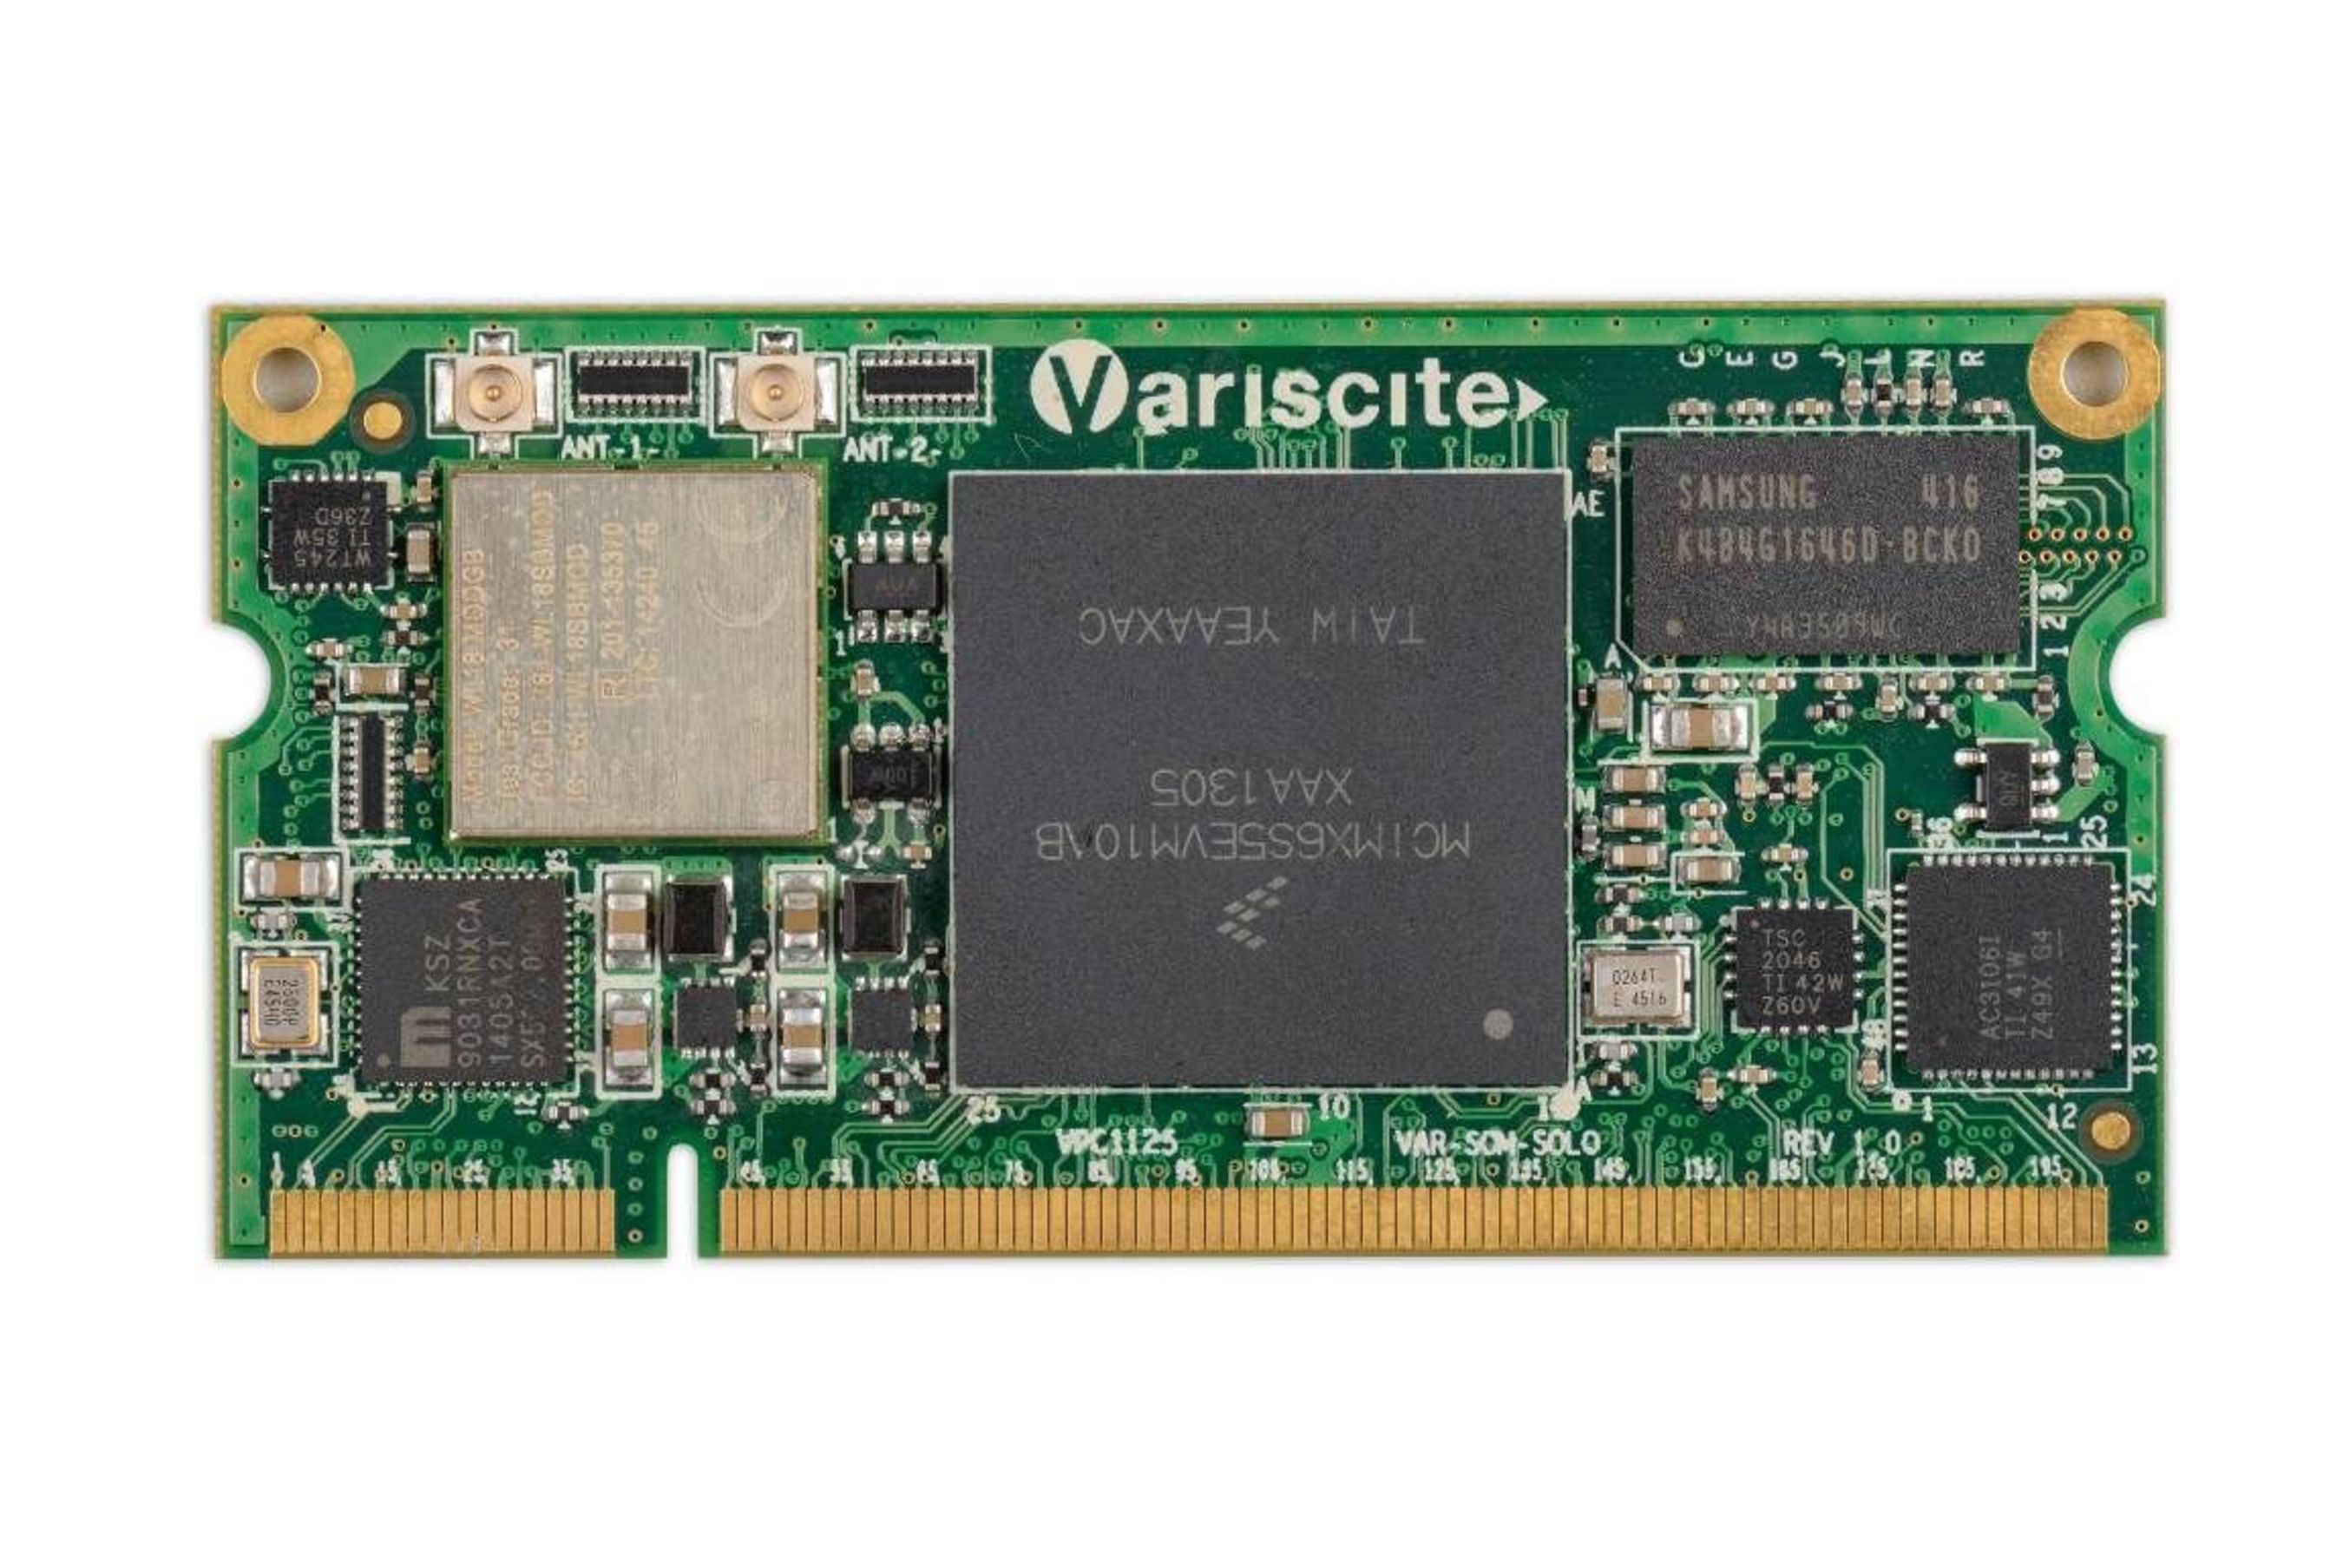 Variscite VAR-SOM-SOLO with Freescale i.MX6 1GHz Cortex-A9 introduces advanced feature-set, small form-factor and a cost-efficient System-on-Module solution for a variety of embedded markets and products (PRNewsFoto/Variscite)